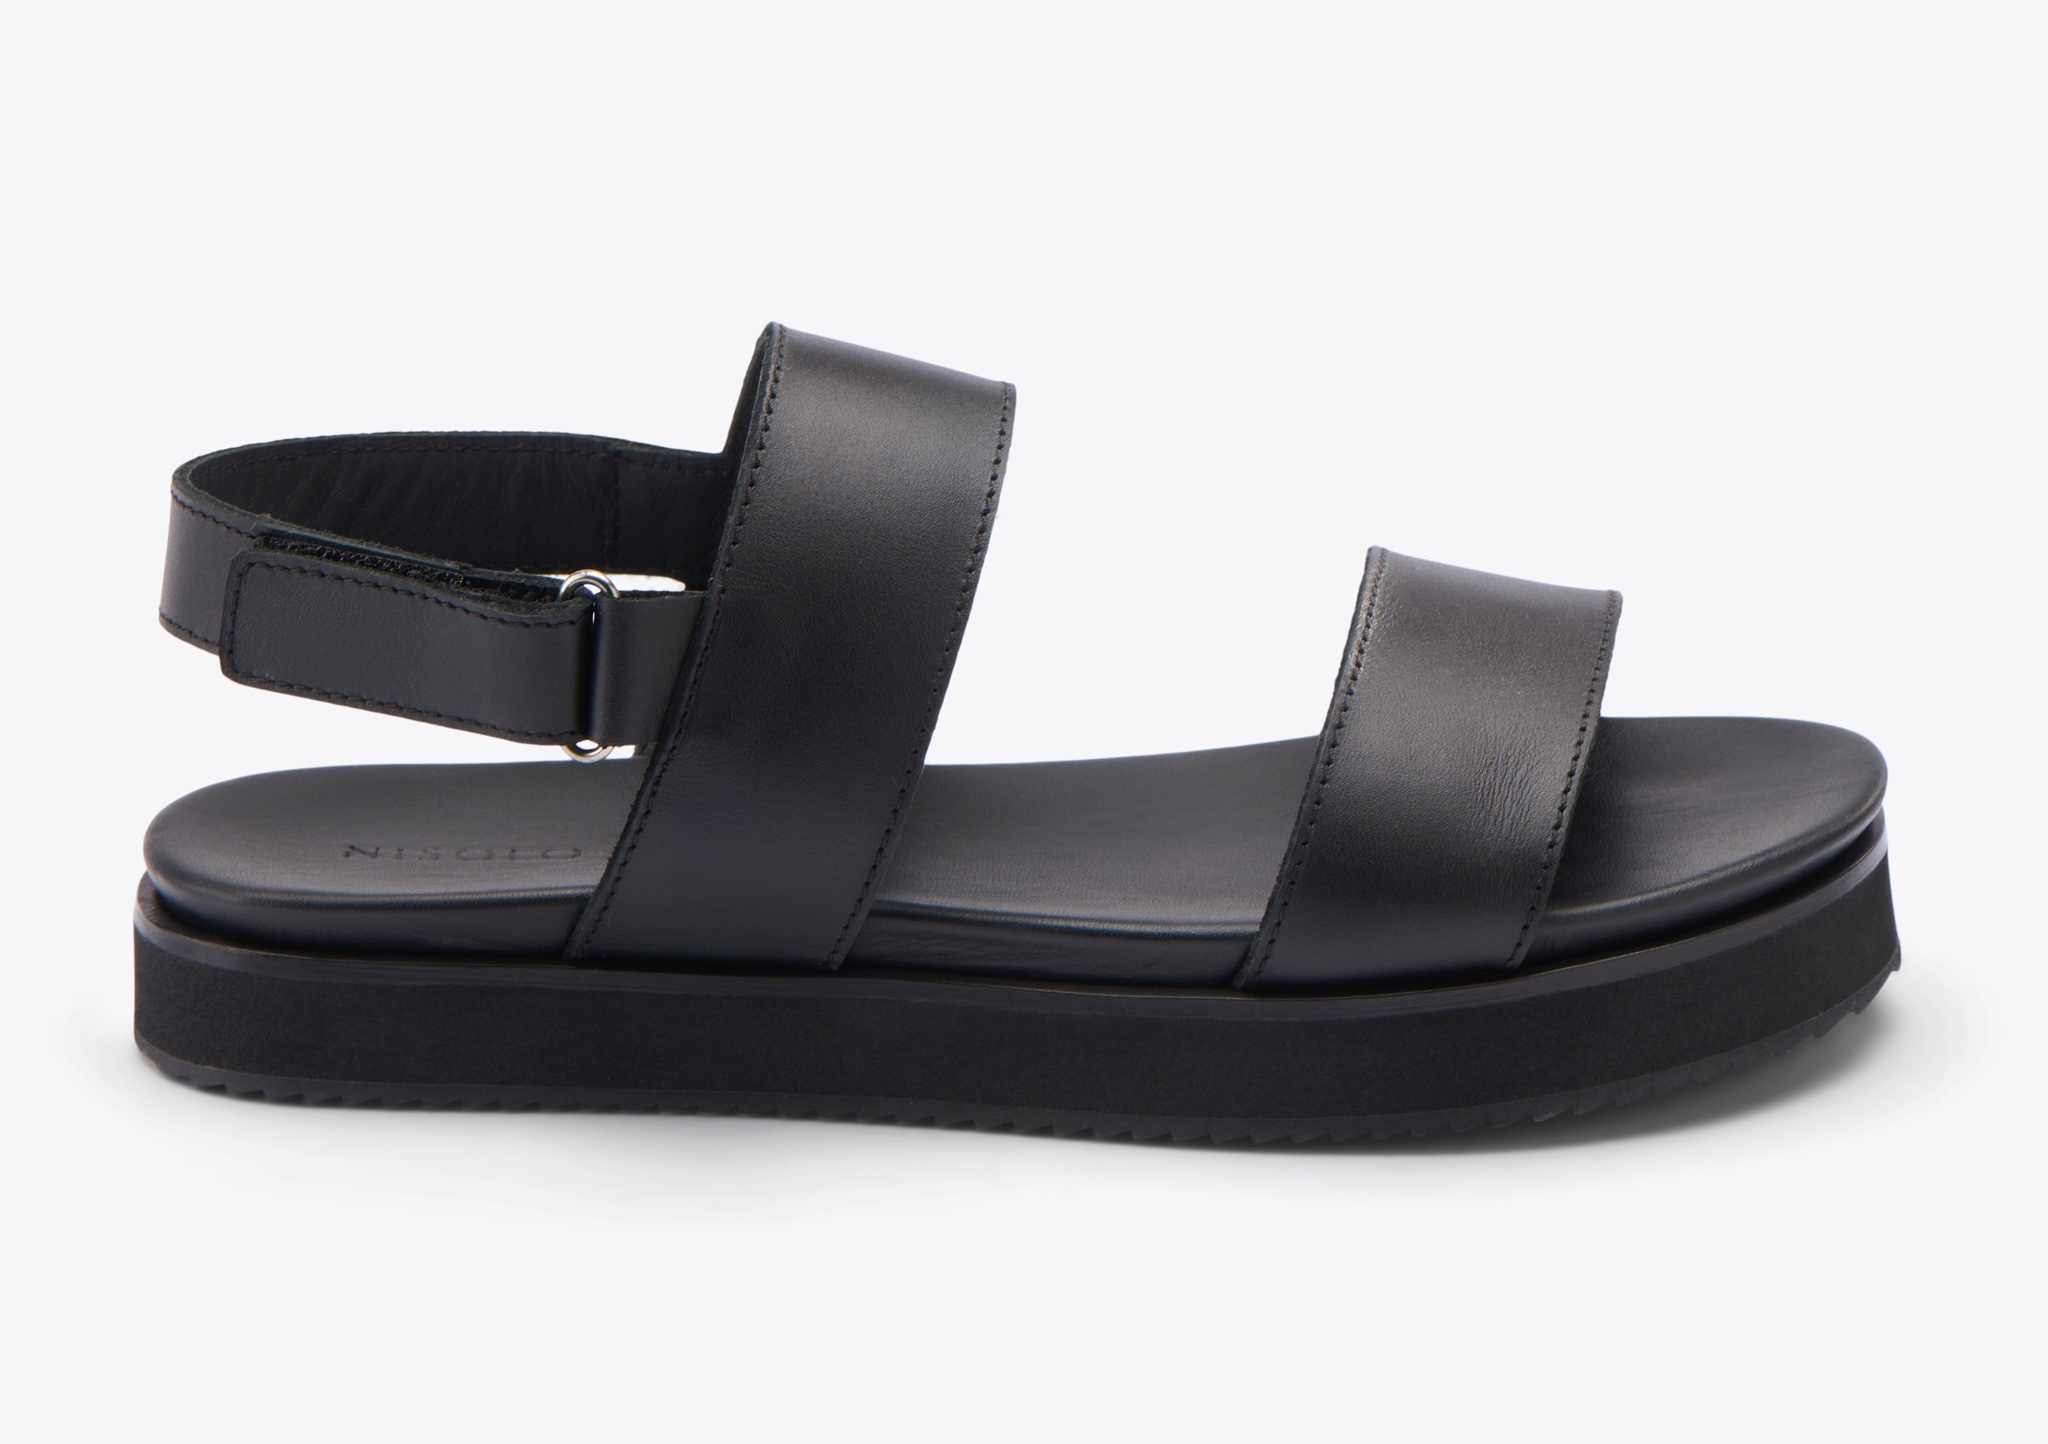 Nisolo Go-To Flatform Sandal Black/Black - Every Nisolo product is built on the foundation of comfort, function, and design. 